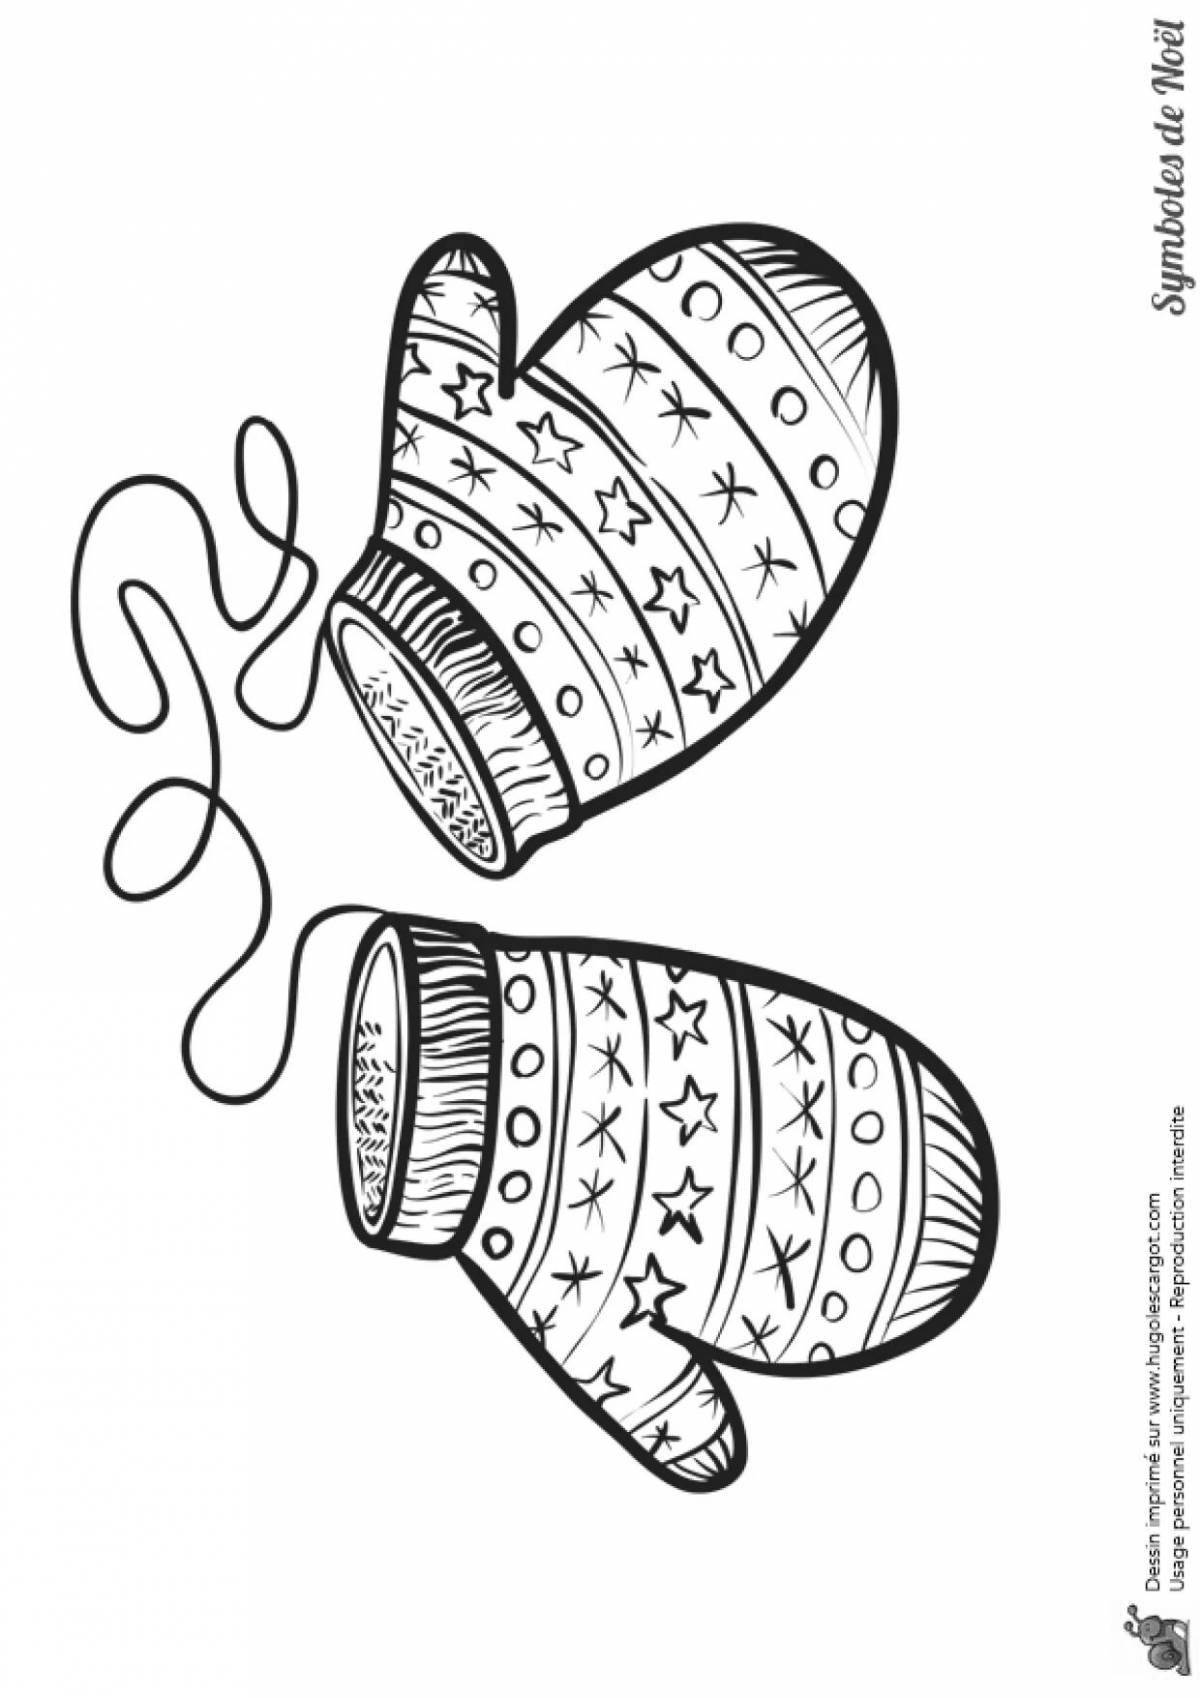 Coloring book witty rubber mittens